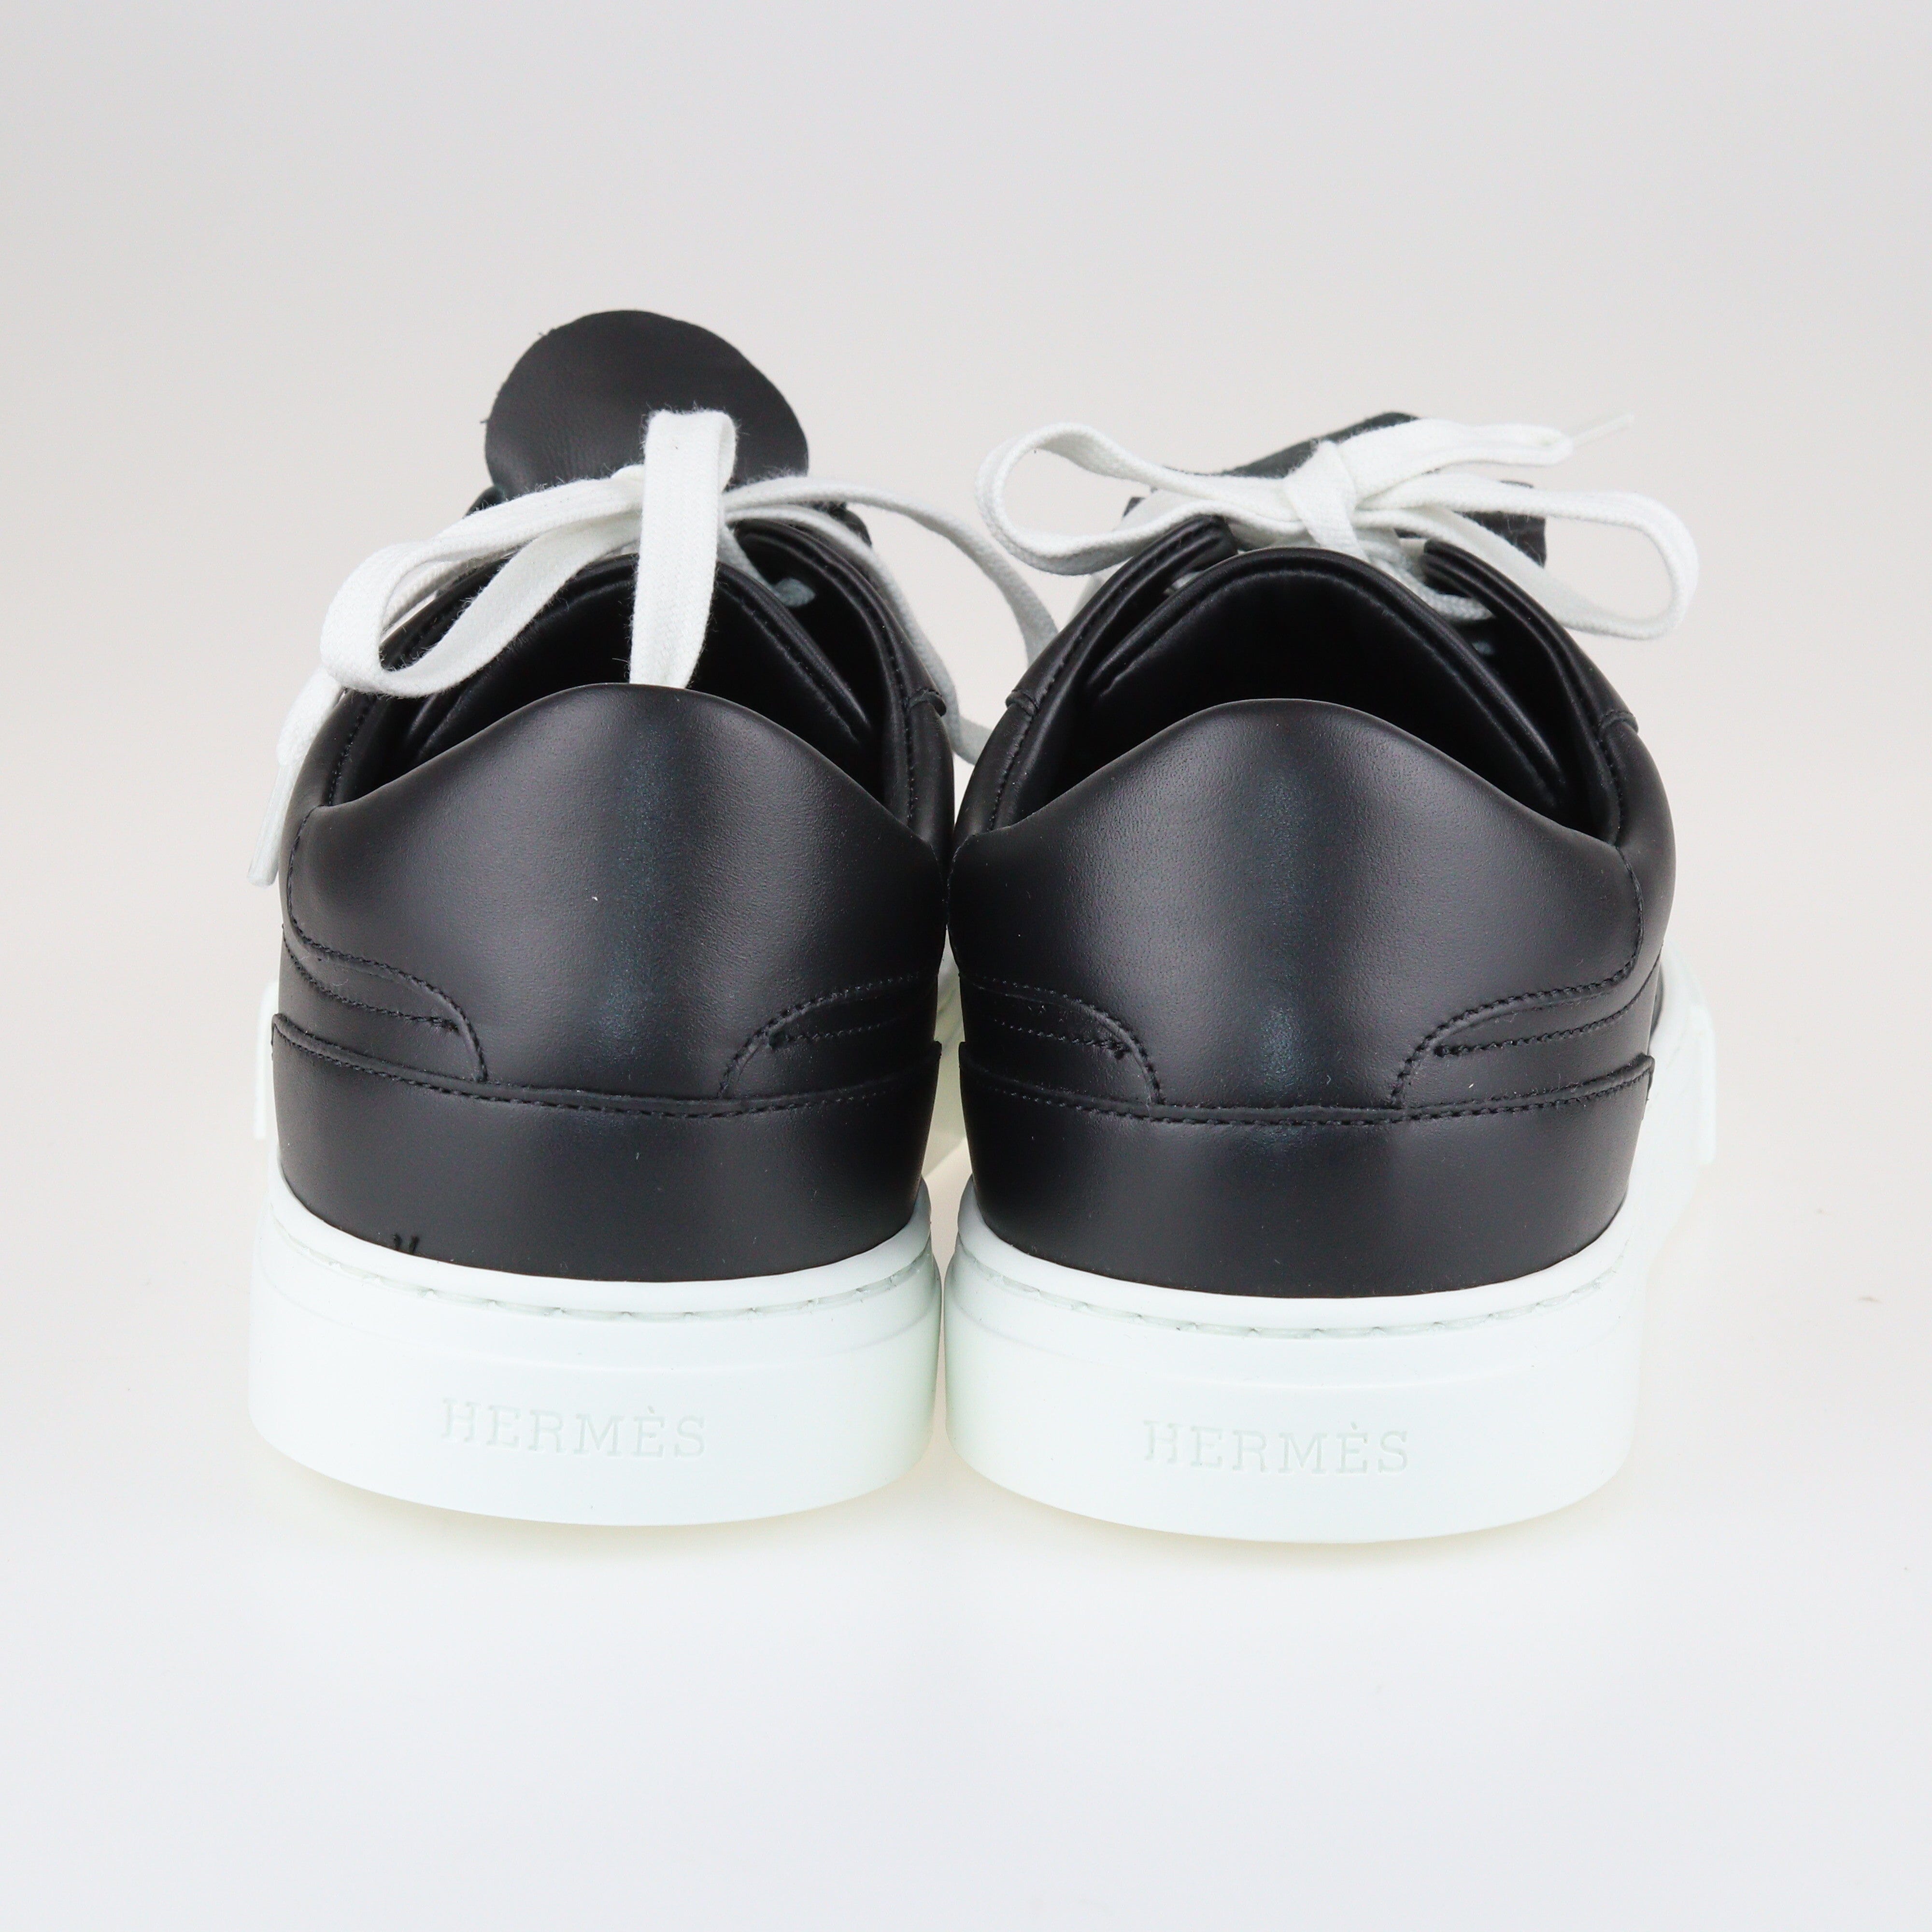 Black/White Day Sneakers Shoes Hermes 